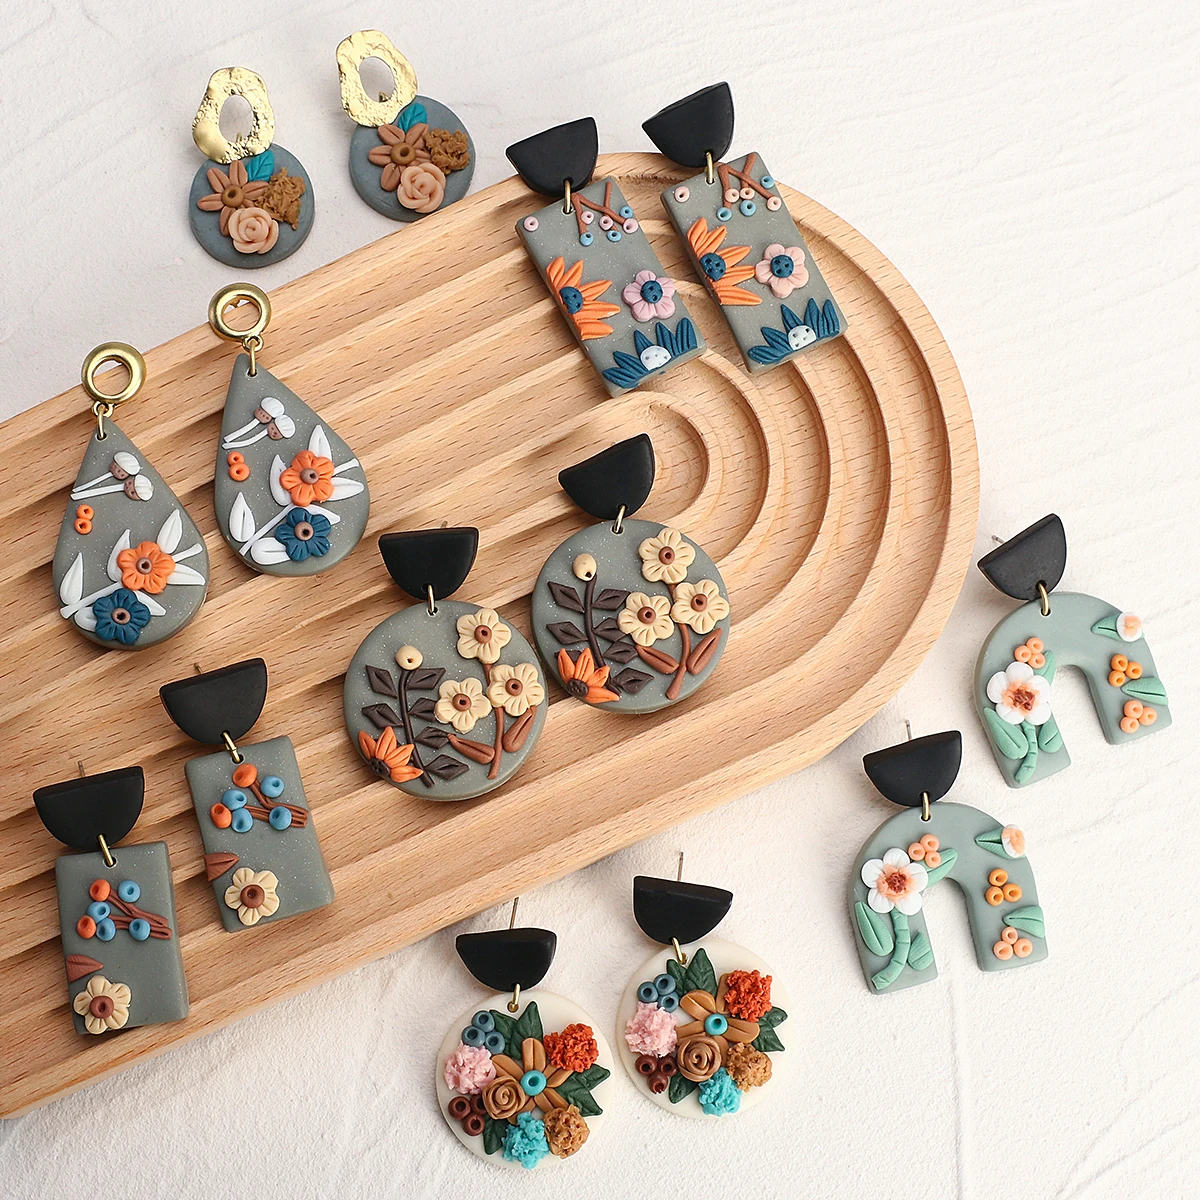 

2021 spring new creative polymer clay colored flowers soft pottery handmade earrings geometric personality earrings wholesale, As picture